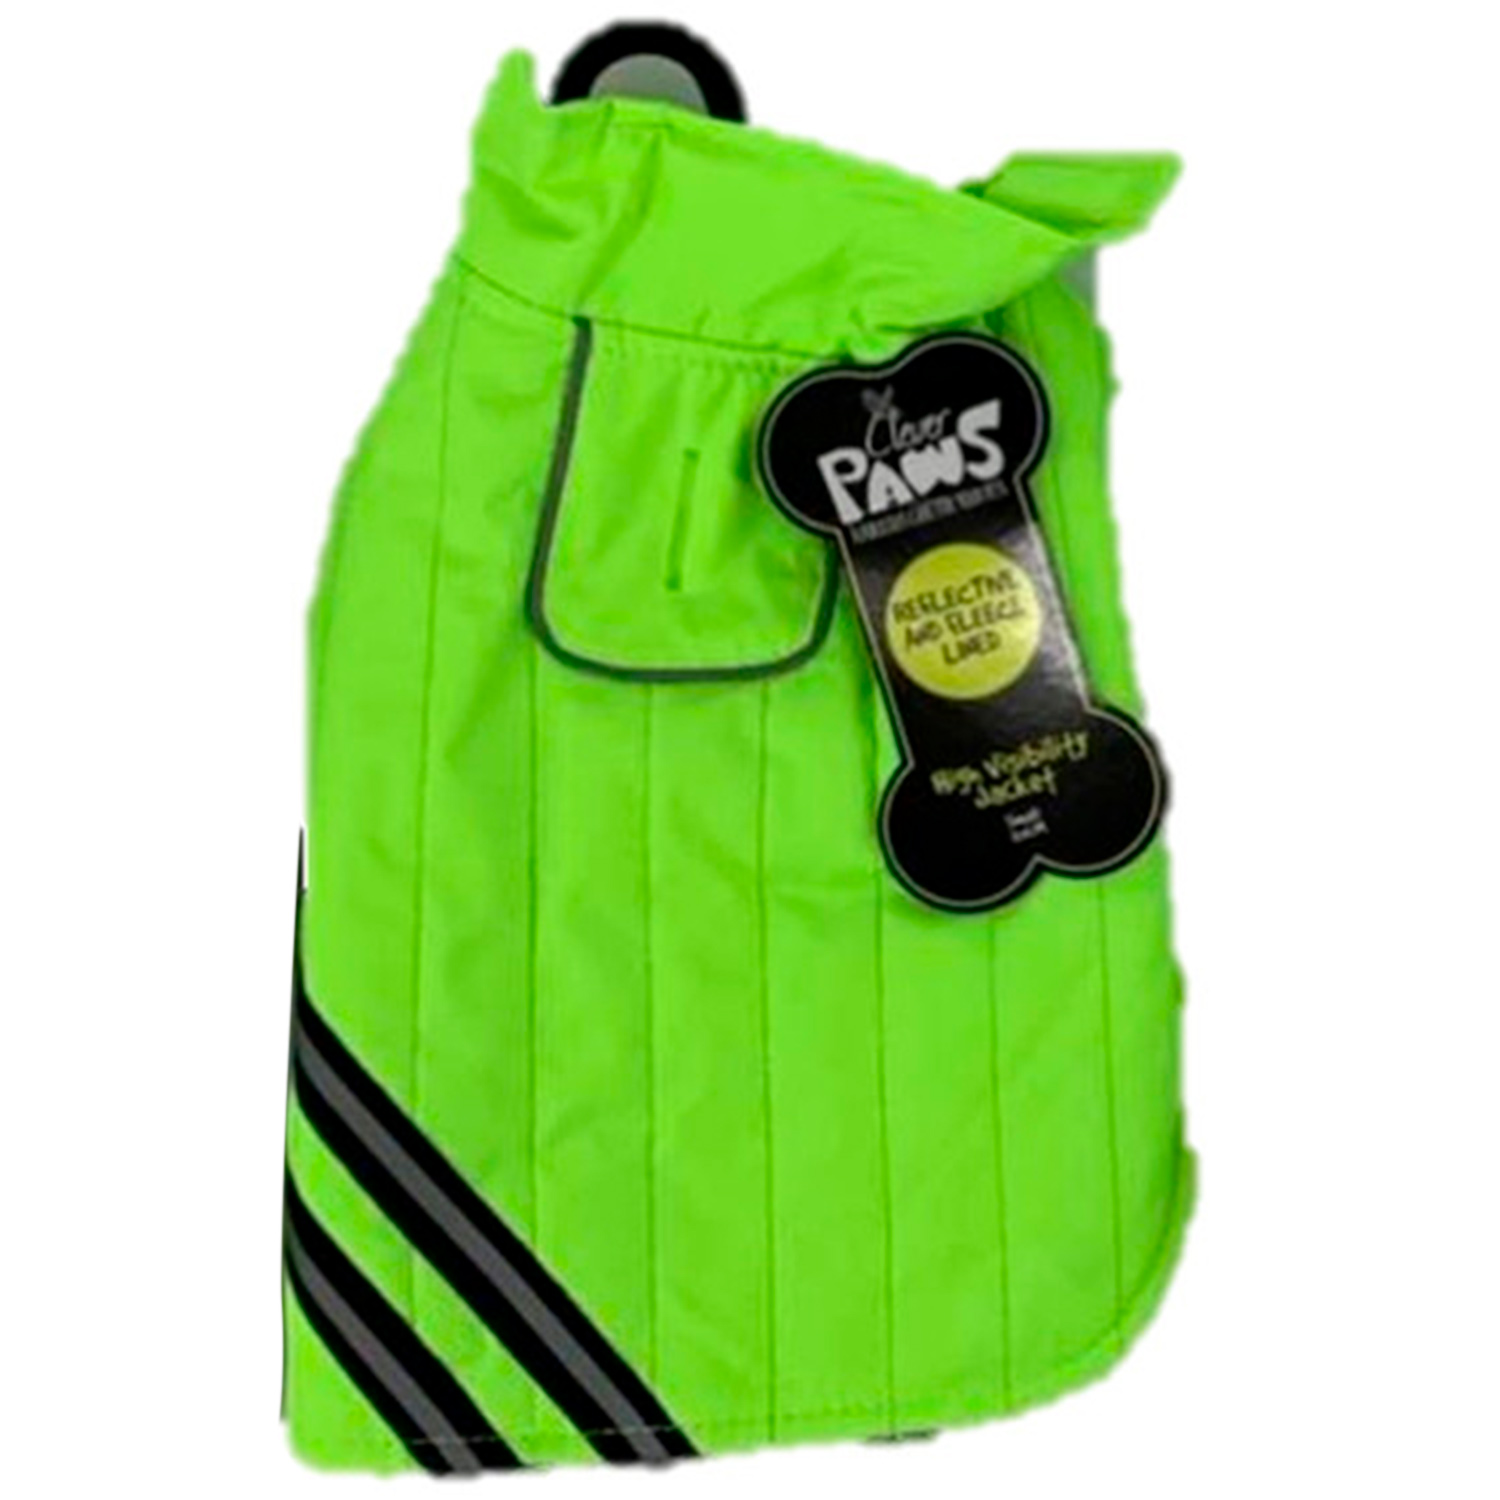 Quilted High Visibility Pet Jacket - 25cm Image